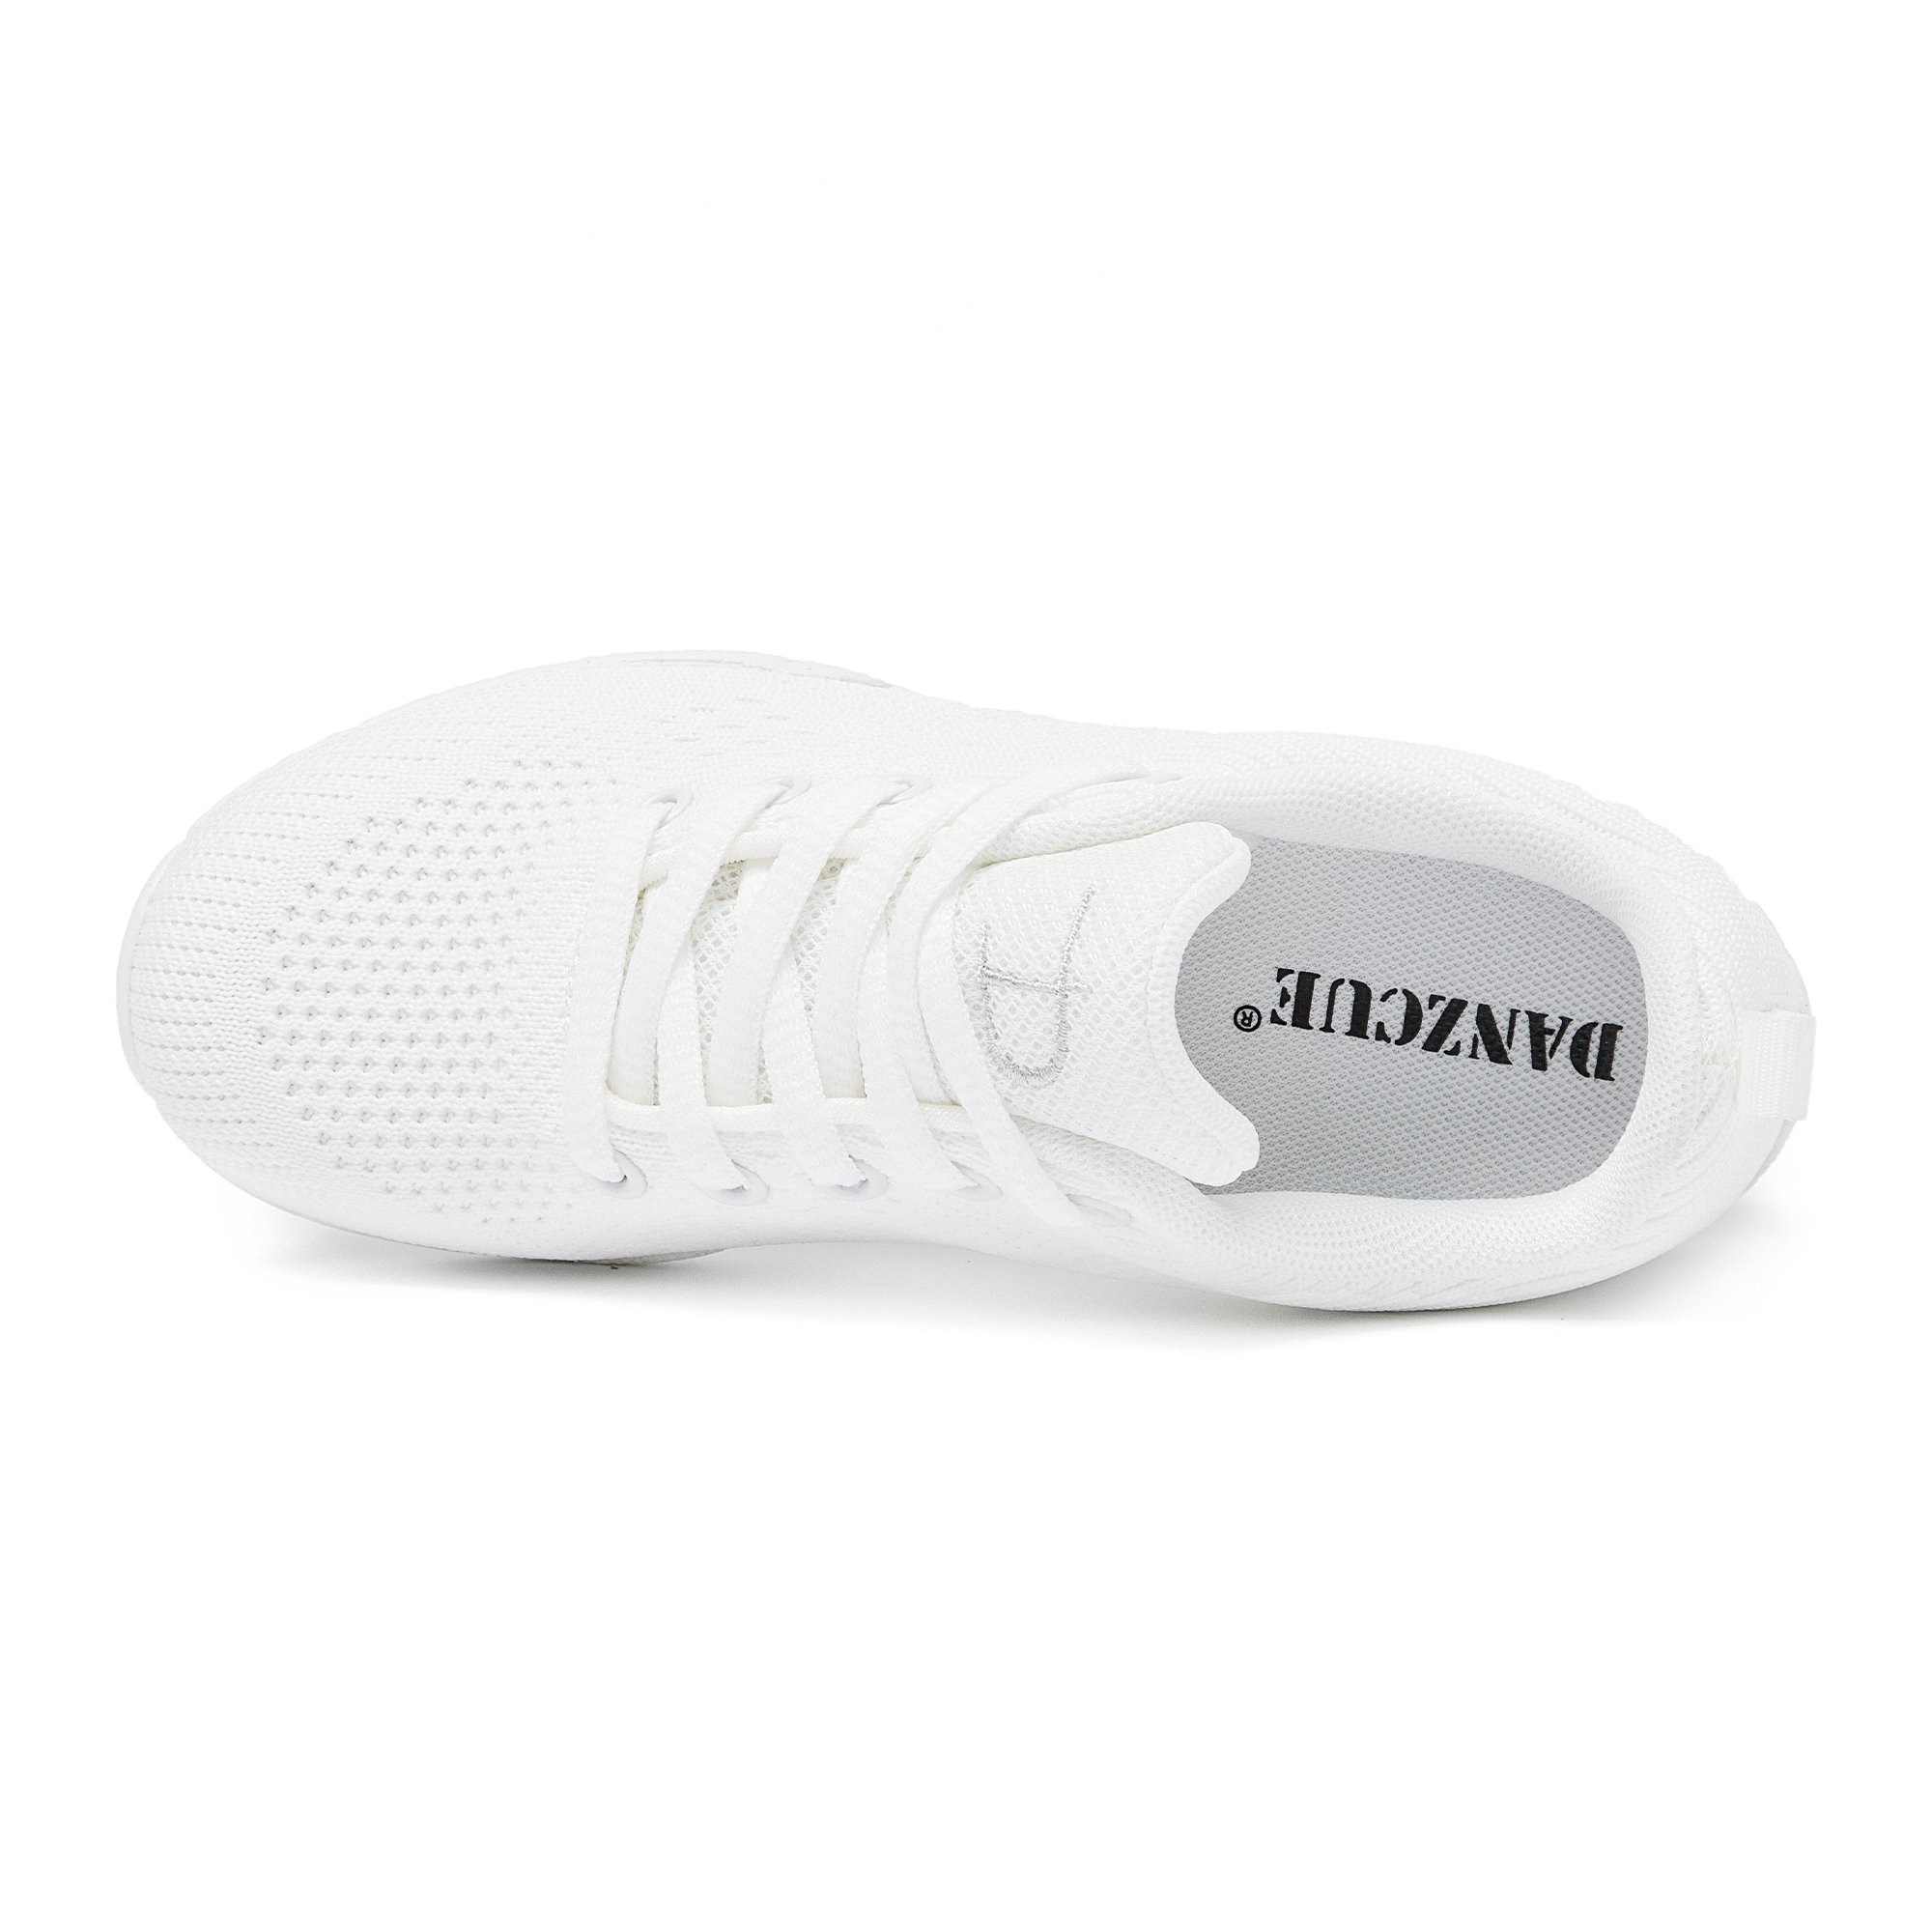 Danzcue Adult White Cheer Shoes - Click Image to Close